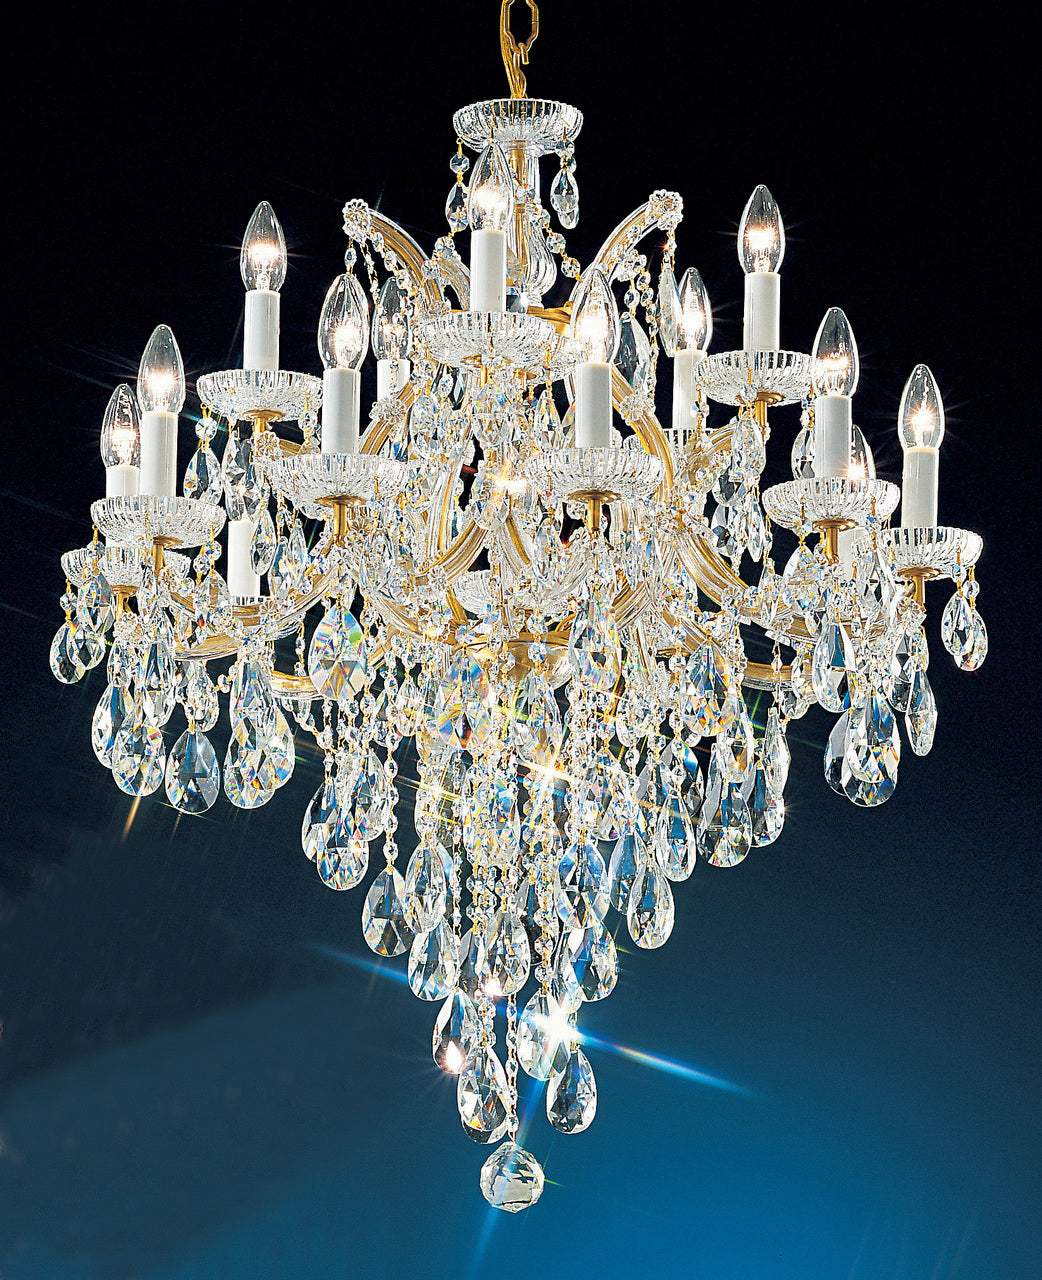 Classic Lighting 8126 OWG SC Maria Theresa Traditional Crystal Chandelier in Olde World Gold (Imported from Italy)